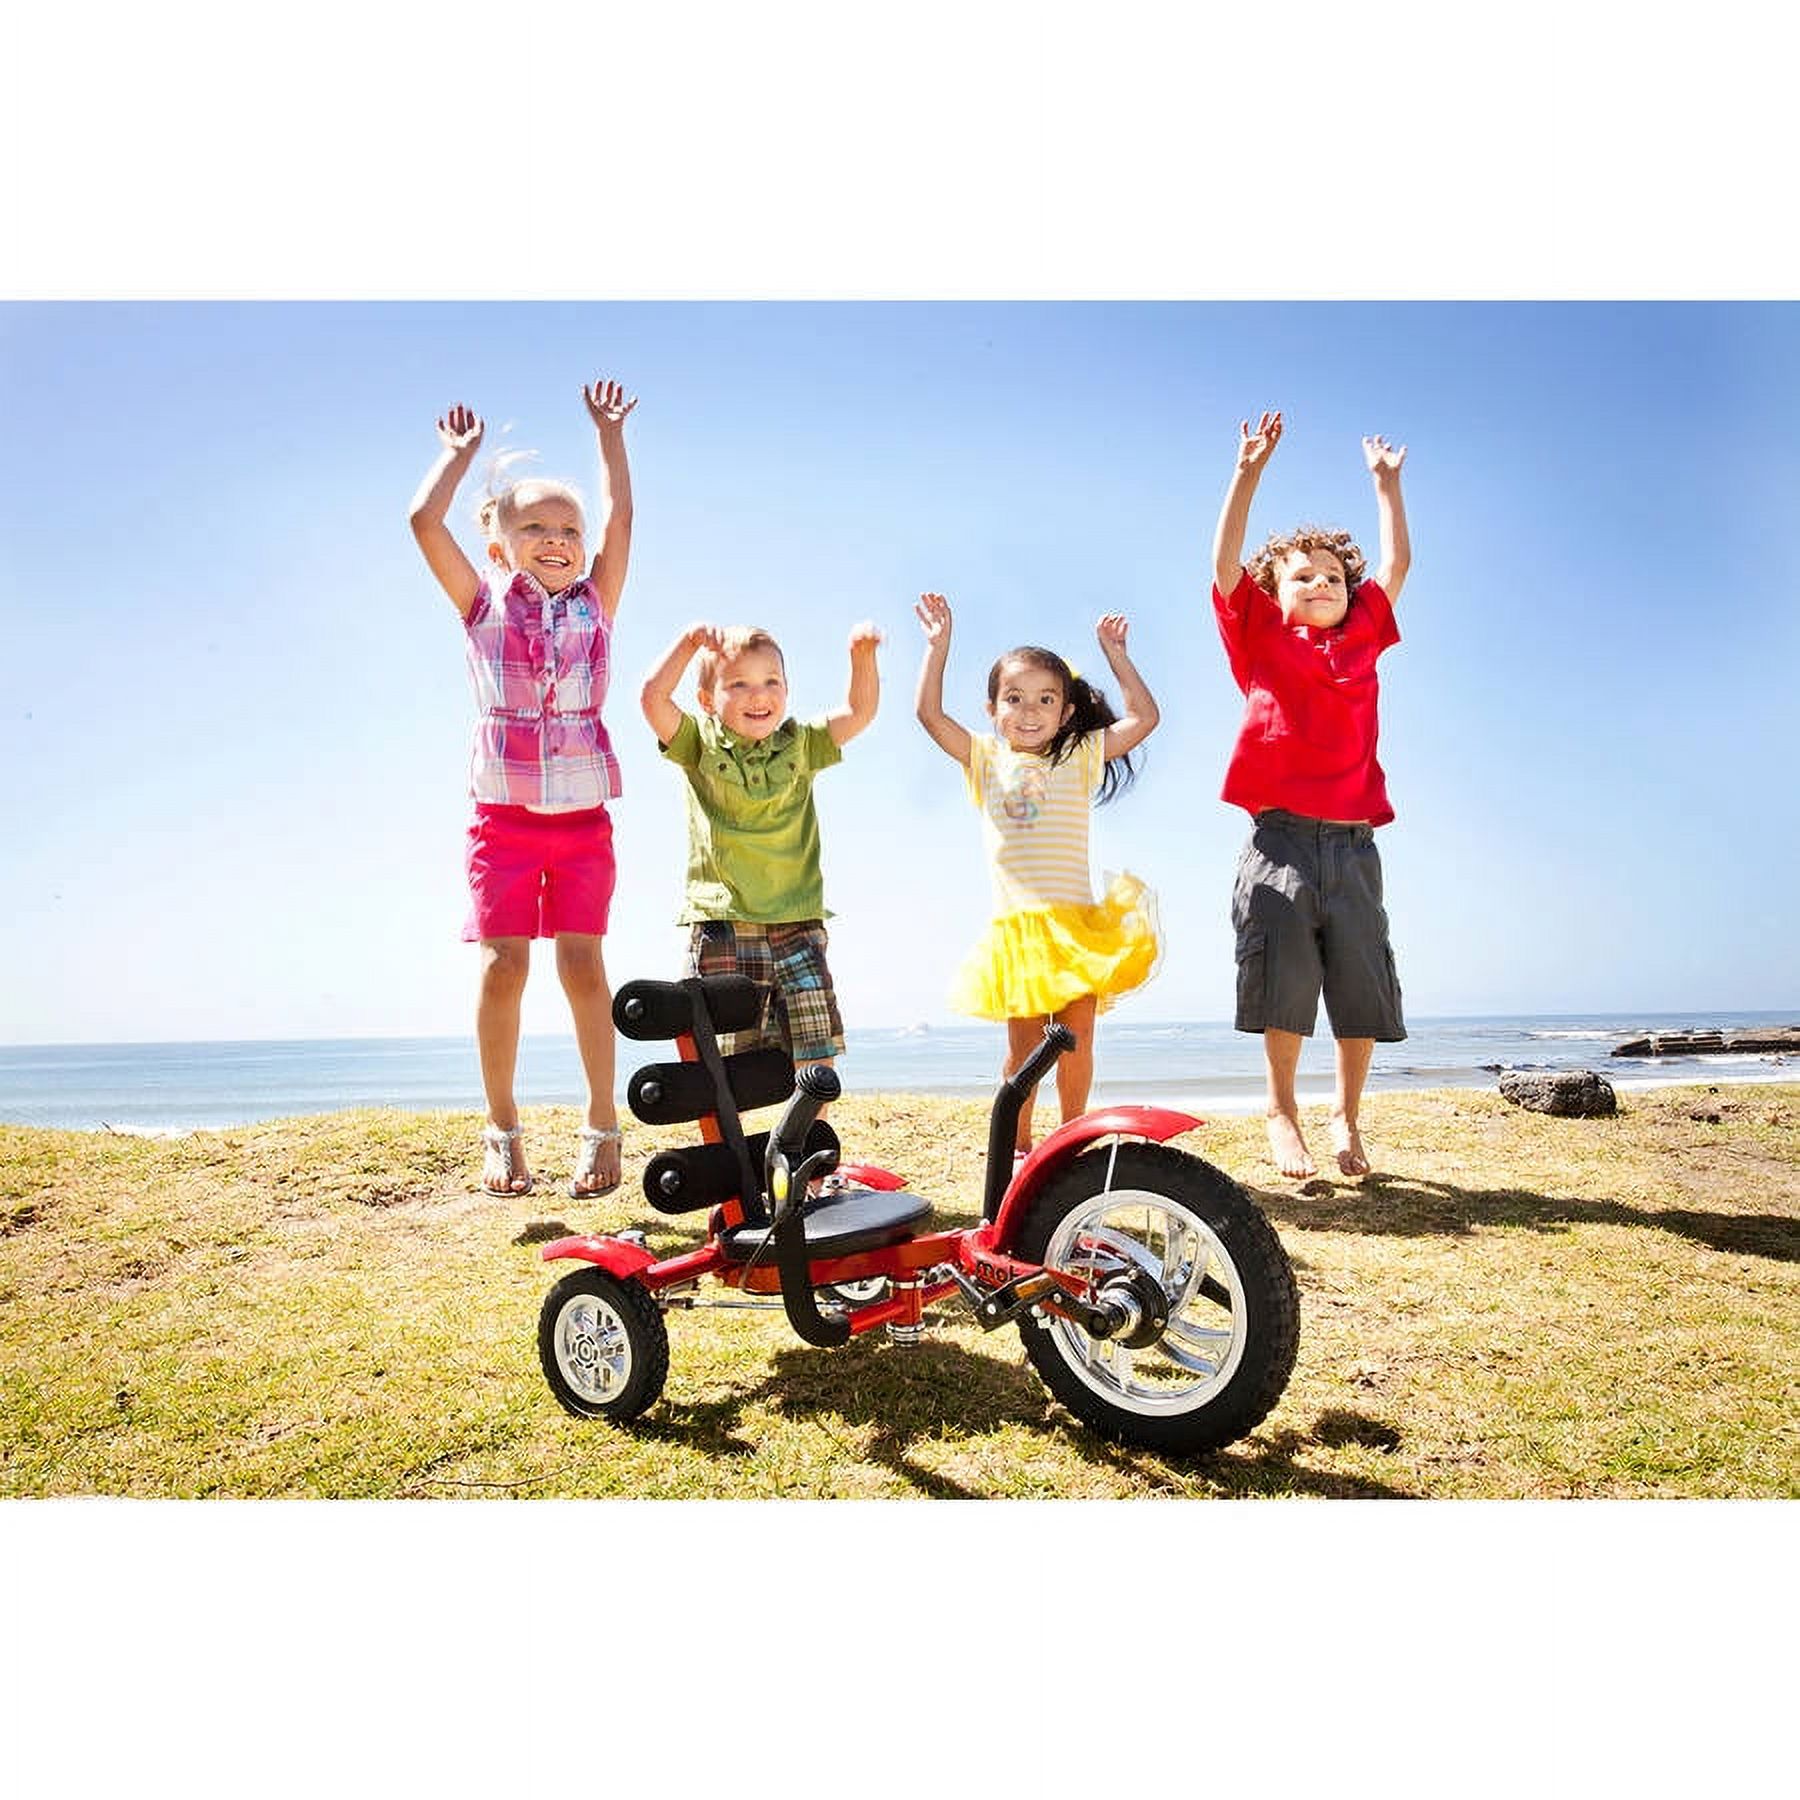 Mobo Mega Mini: The Roll-to-Ride 3-Wheeled Cruiser Tricycle, Push & Pedal Ride On Toy, Red - image 5 of 6